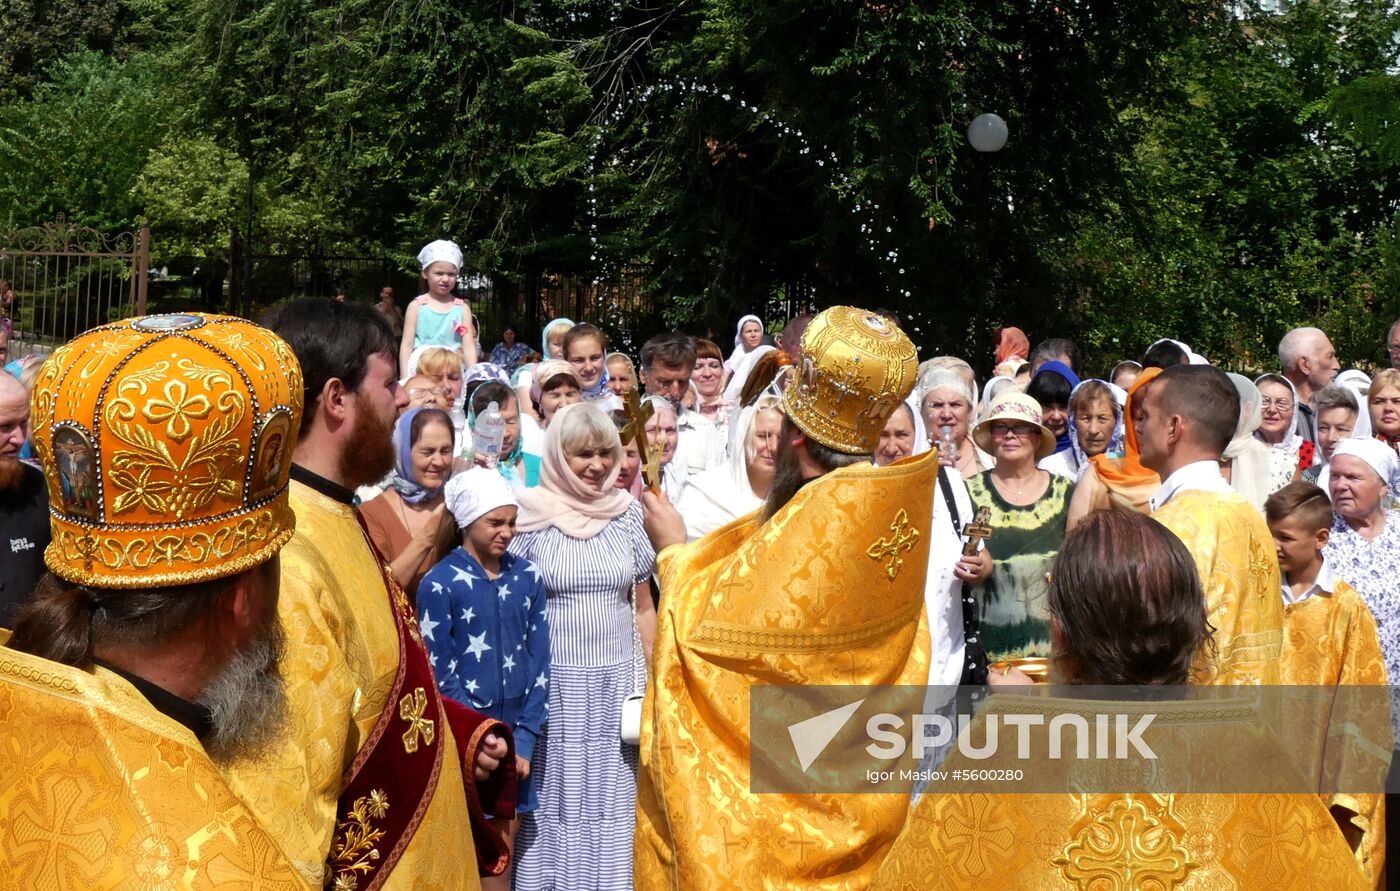 Donetsk and Lugansk celebrate 1030th anniversary of the Baptism of Rus